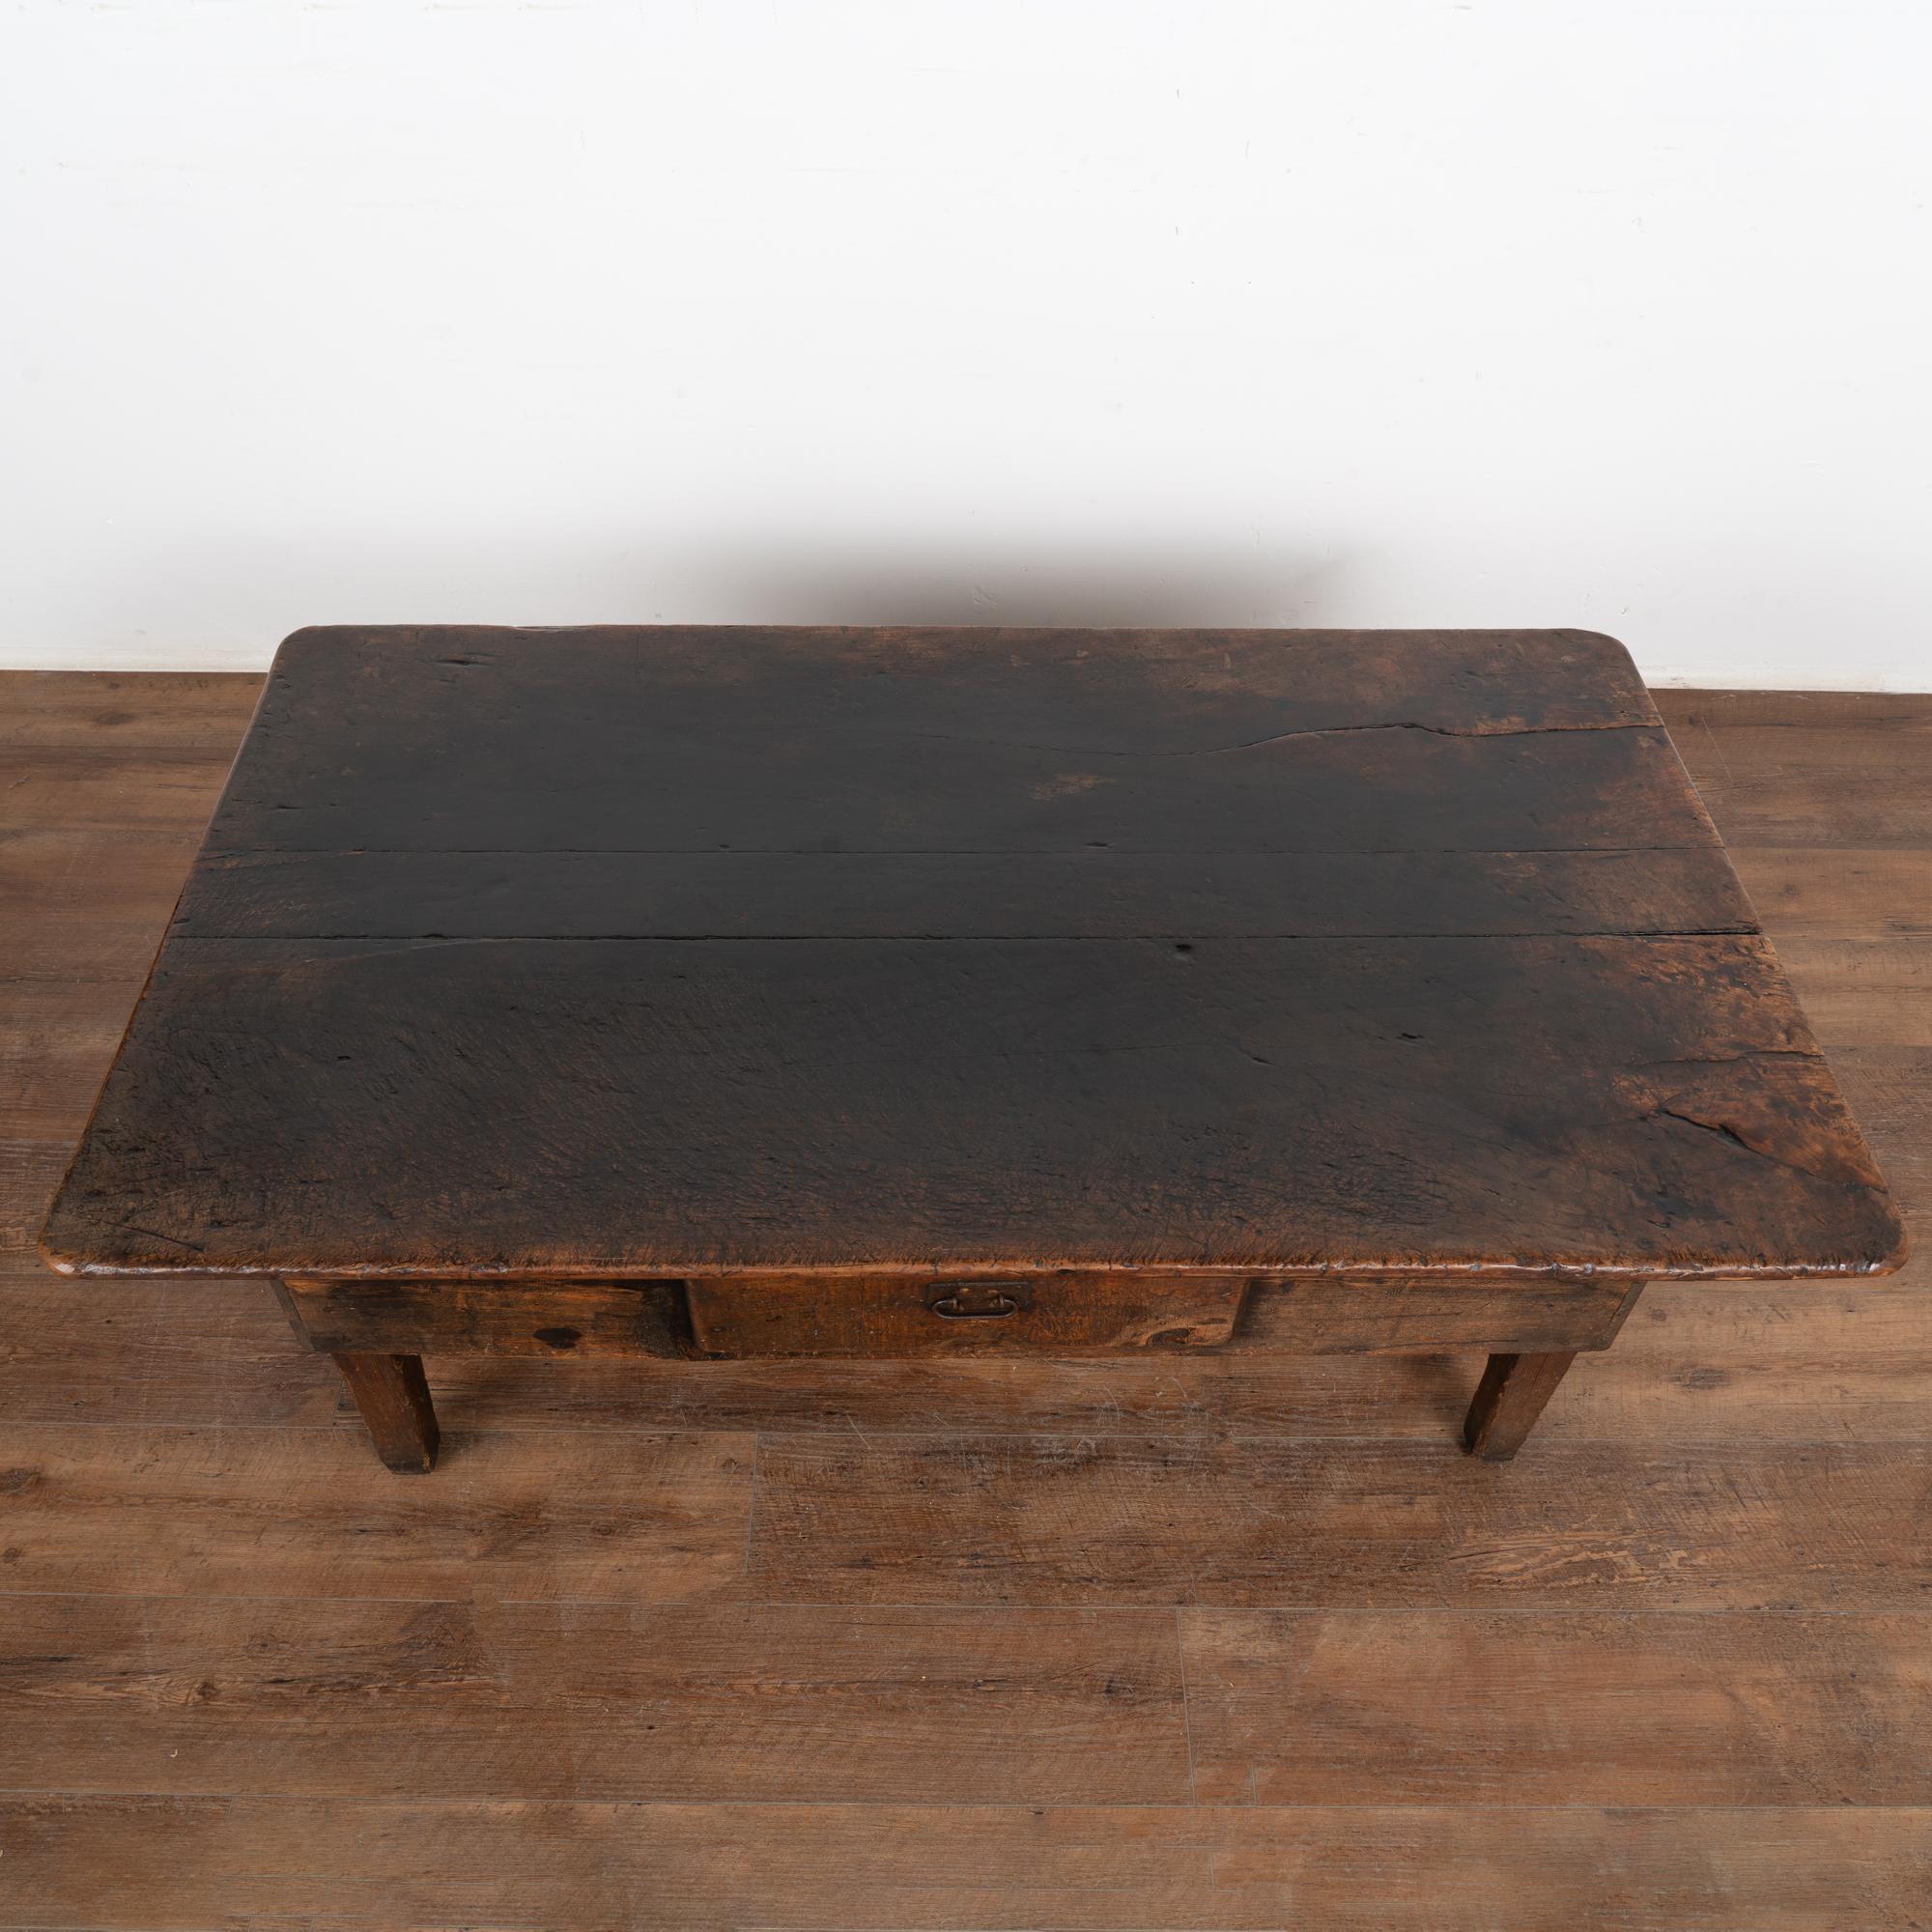 19th Century French Country Coffee Table With Single Drawer, Circa 1800-40